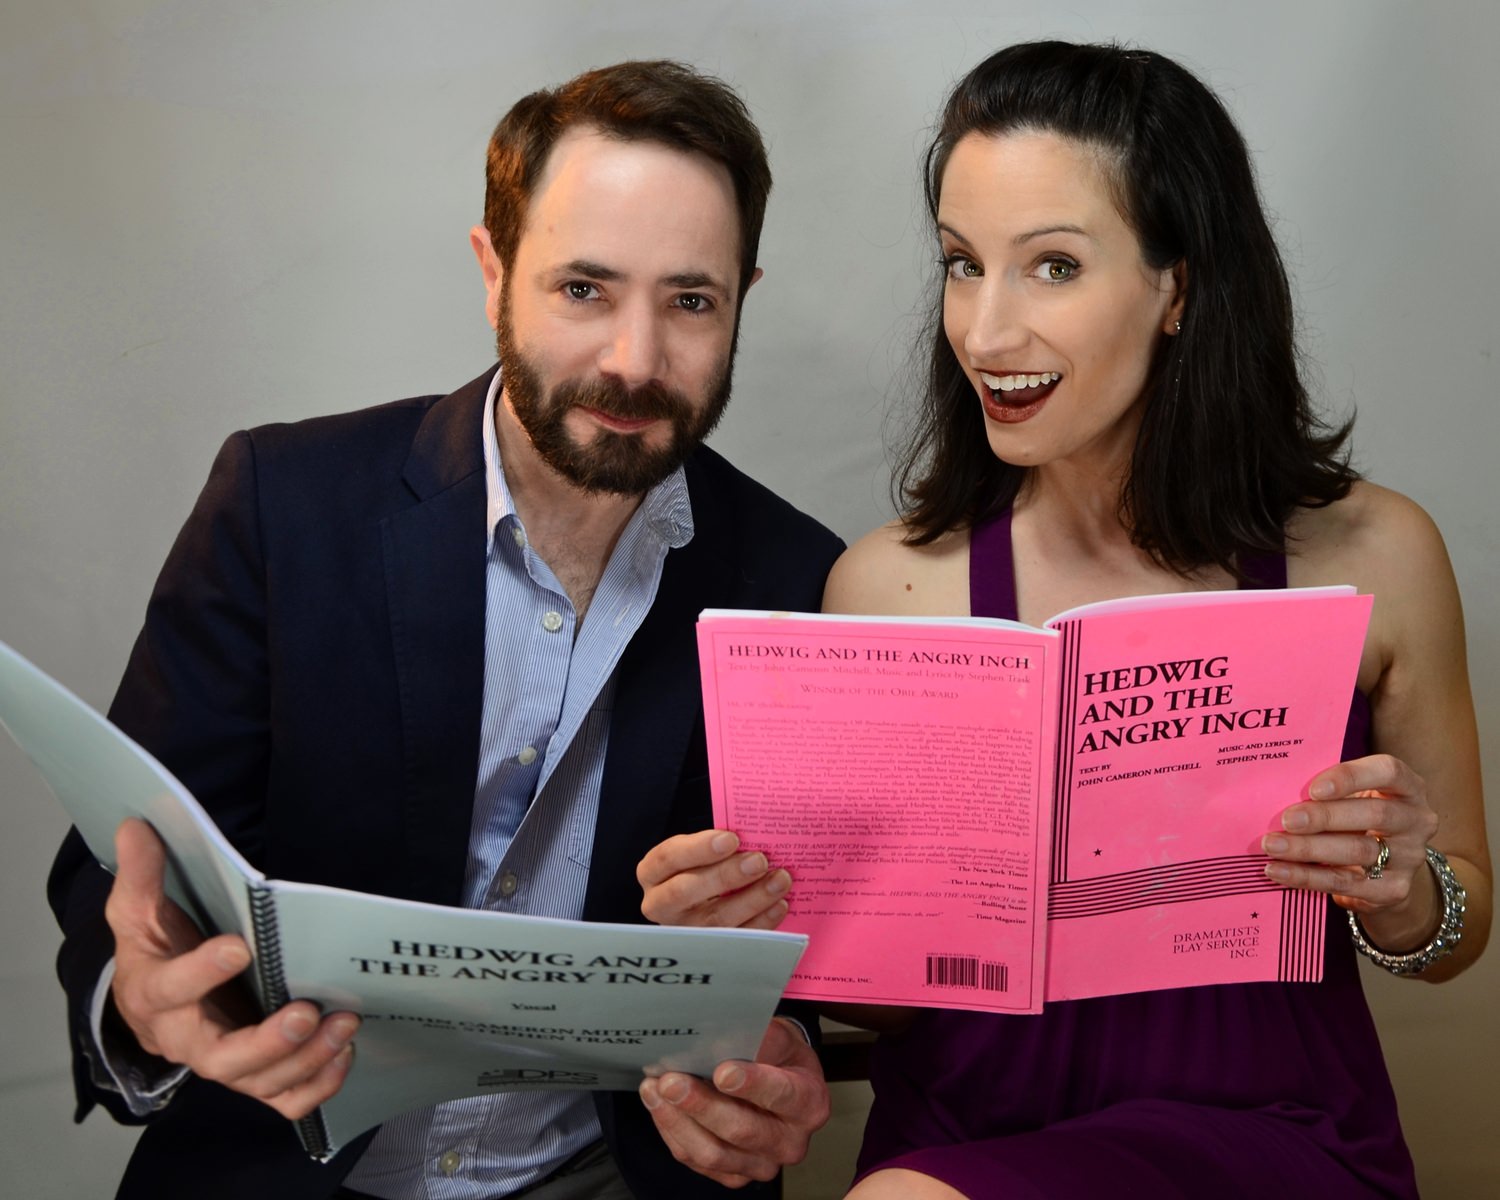 Dane Peterson and Tawny Stephens will star in the Birmingham production of HEDWIG and the ANGRY INCH, playing the Virginia Samford Theatre, June 2-13, 2015.
Photo Credit: David Garrett